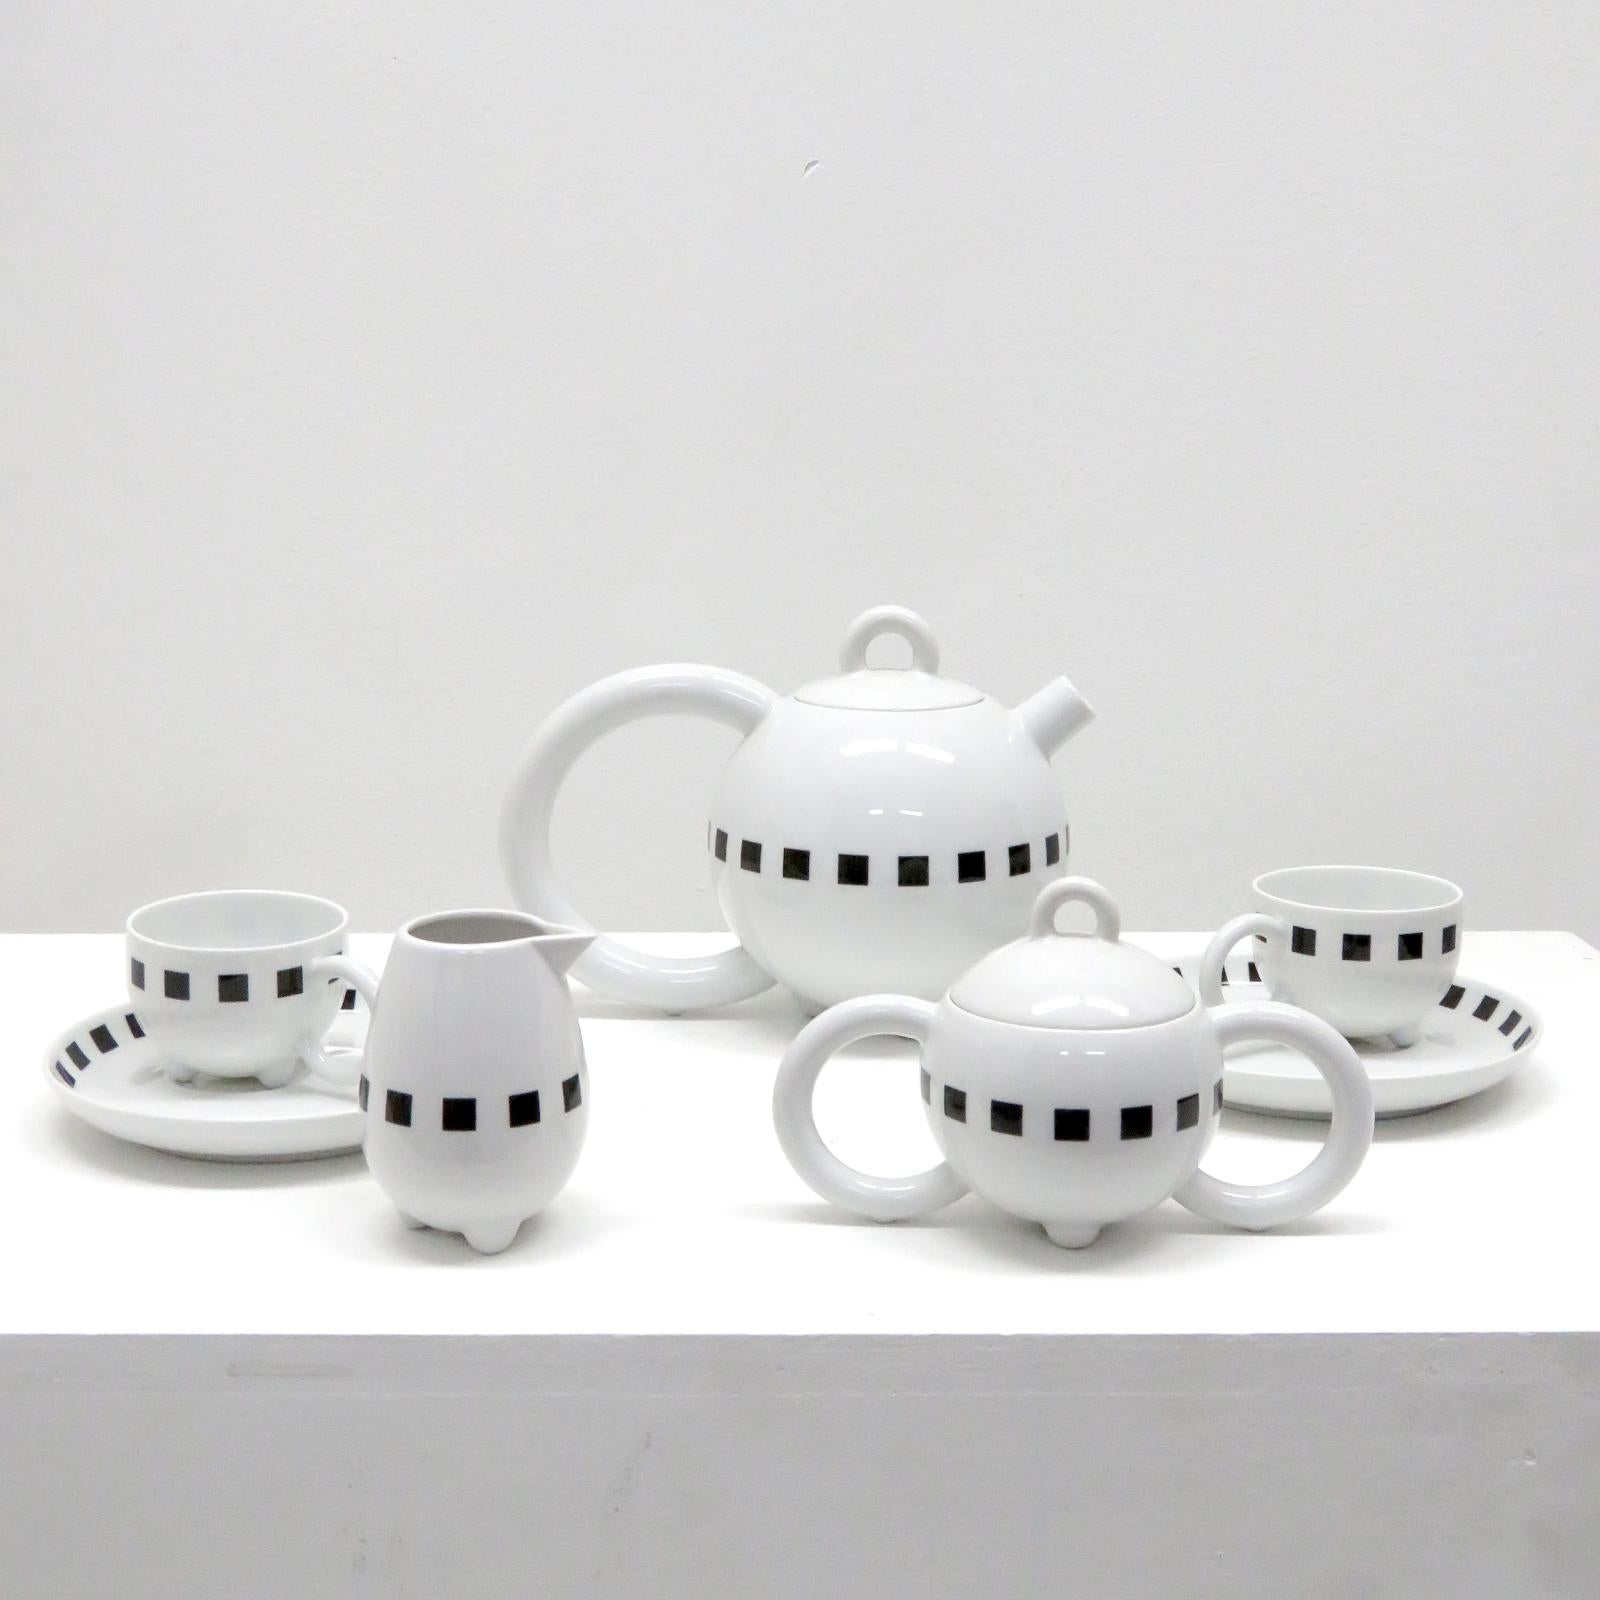 Stunning Memphis-style Seven-piece porcelain tea set 'Fantasia' with 'Carre Noir' decor by Matteo Thun for Arzberg Porzellan, Germany. The set contains a tea pot with lid, two cups with saucers, a milk vessel and a sugar container with lid, marked